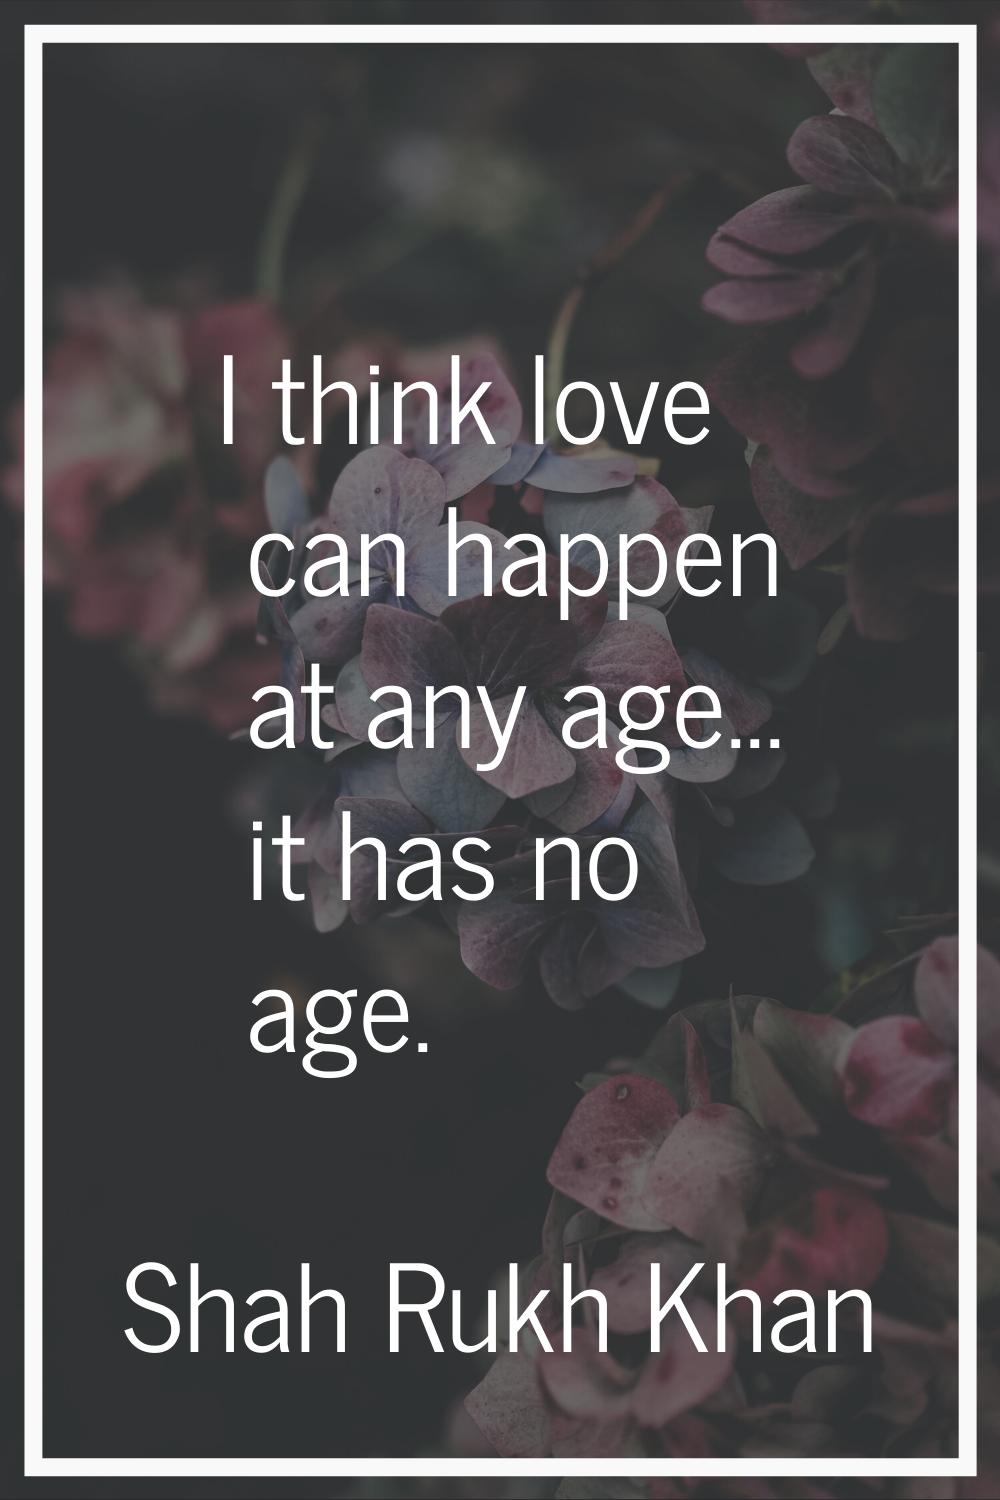 I think love can happen at any age... it has no age.